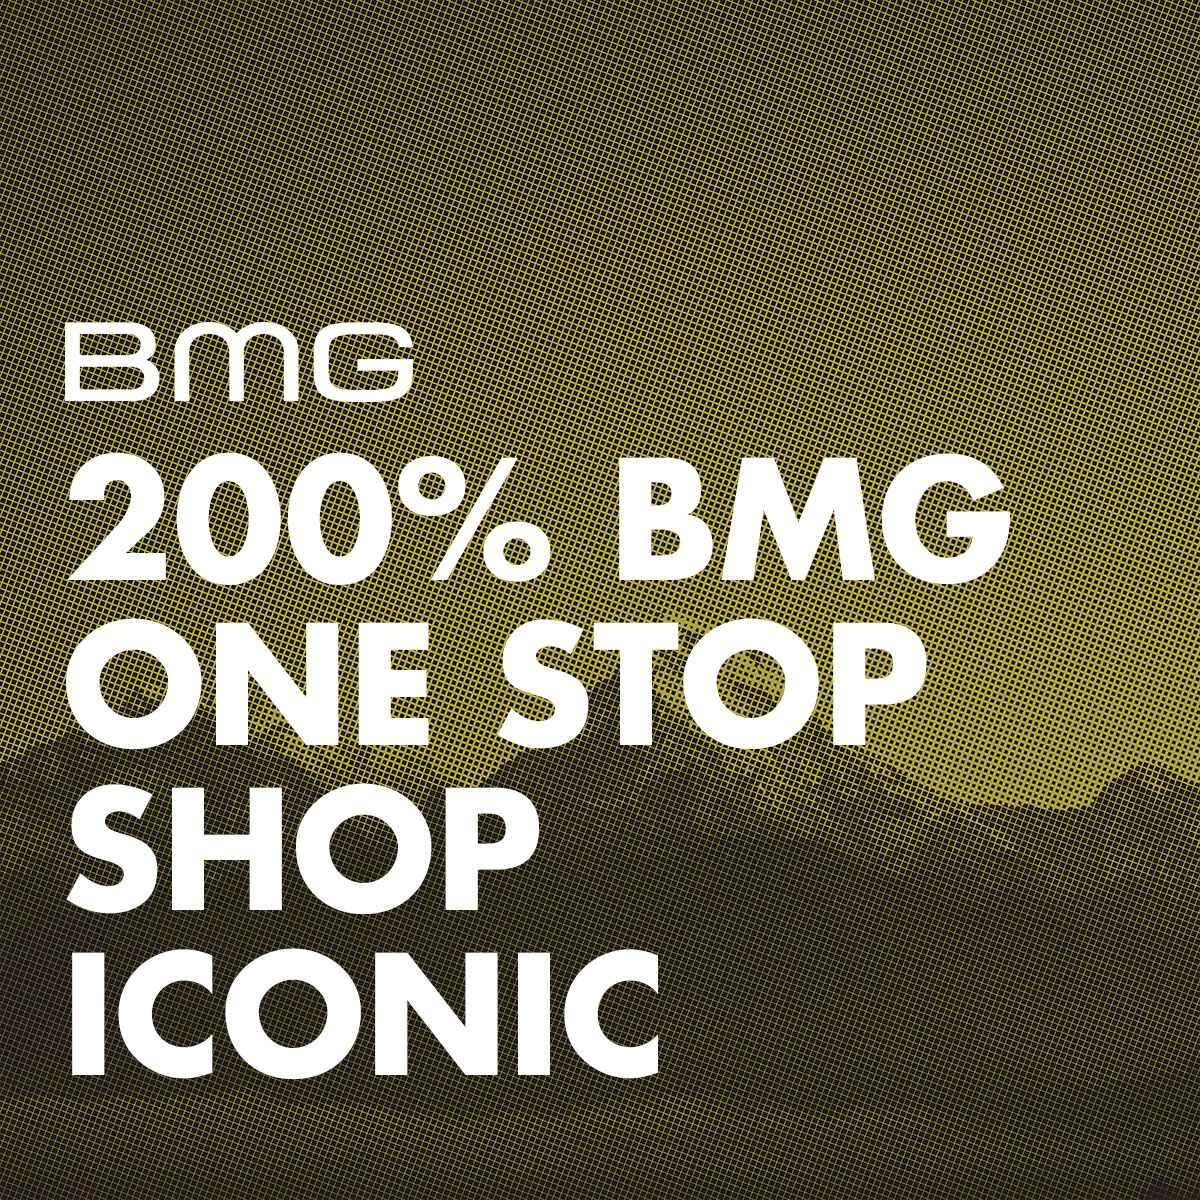  200% BMG; One-Stop-Shop; Iconic 